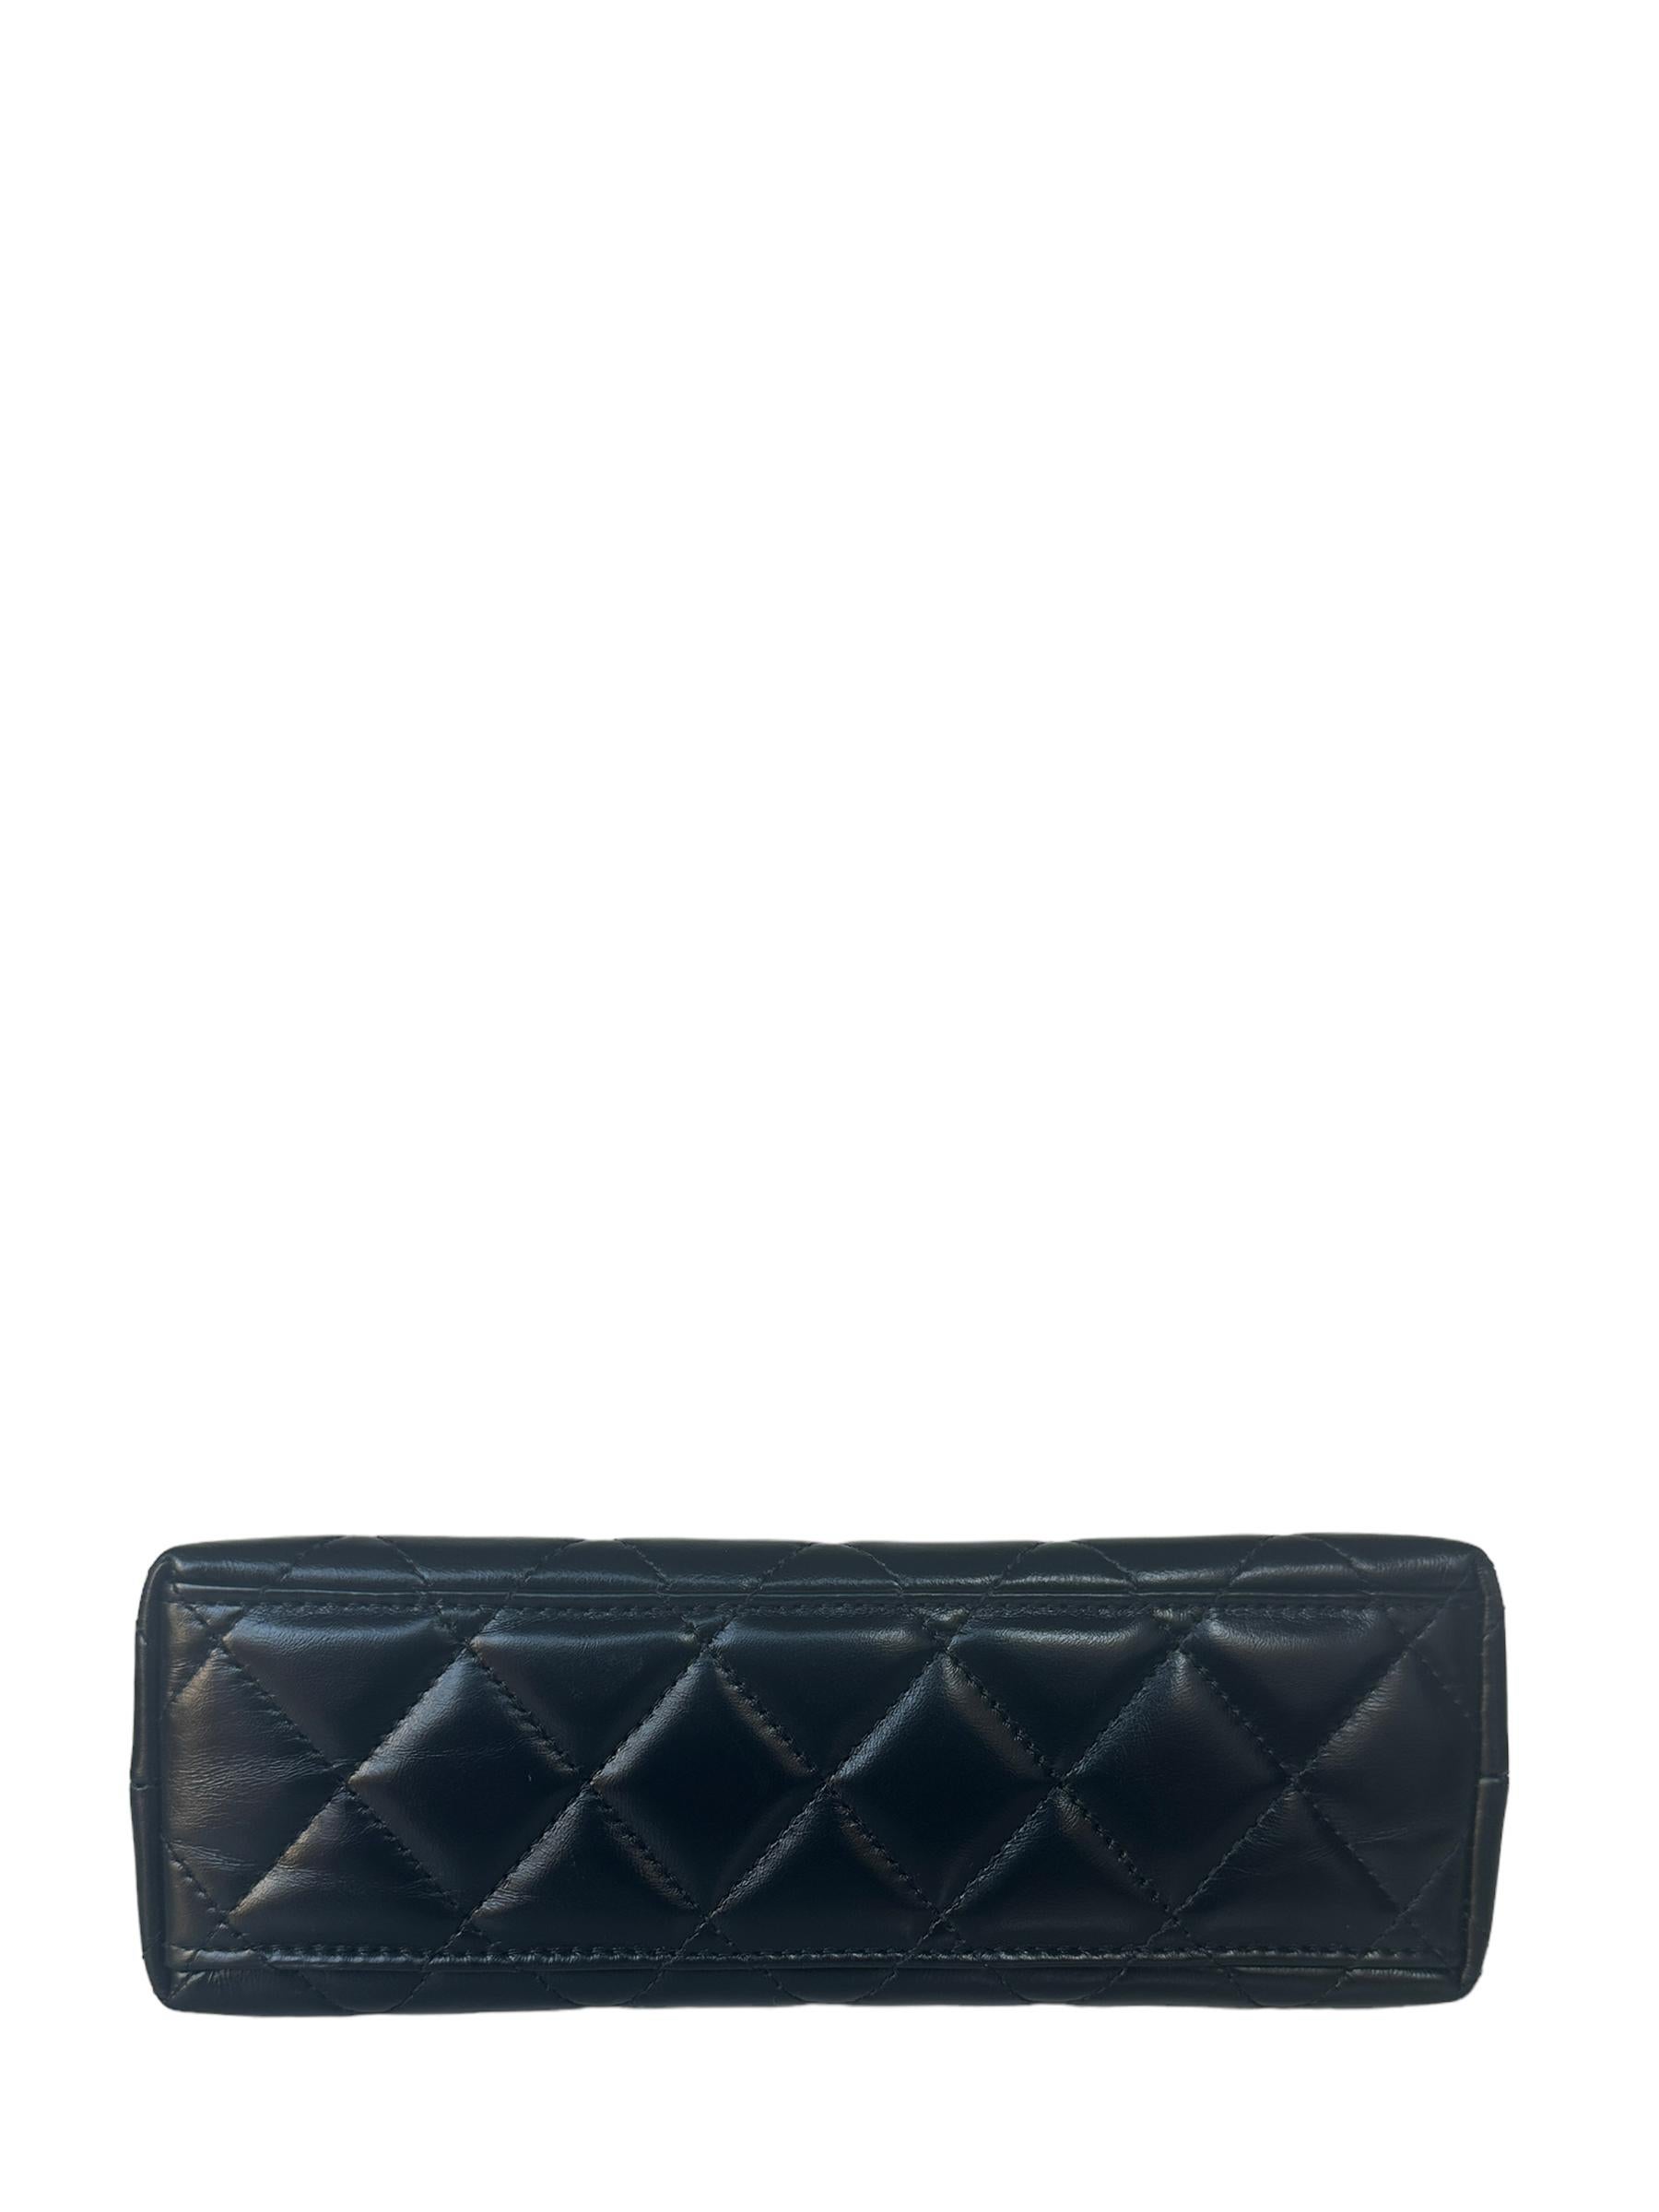 Chanel Black Calfskin Leather Quilted Nano Kelly Shopper Bag

Made In: France
Year of Production: 2023
Color: Black
Hardware: Goldtone
Materials: Aged shiny calfskin leather, metal
Lining: 
Closure/Opening: Center flap with CC twist-lock
Exterior